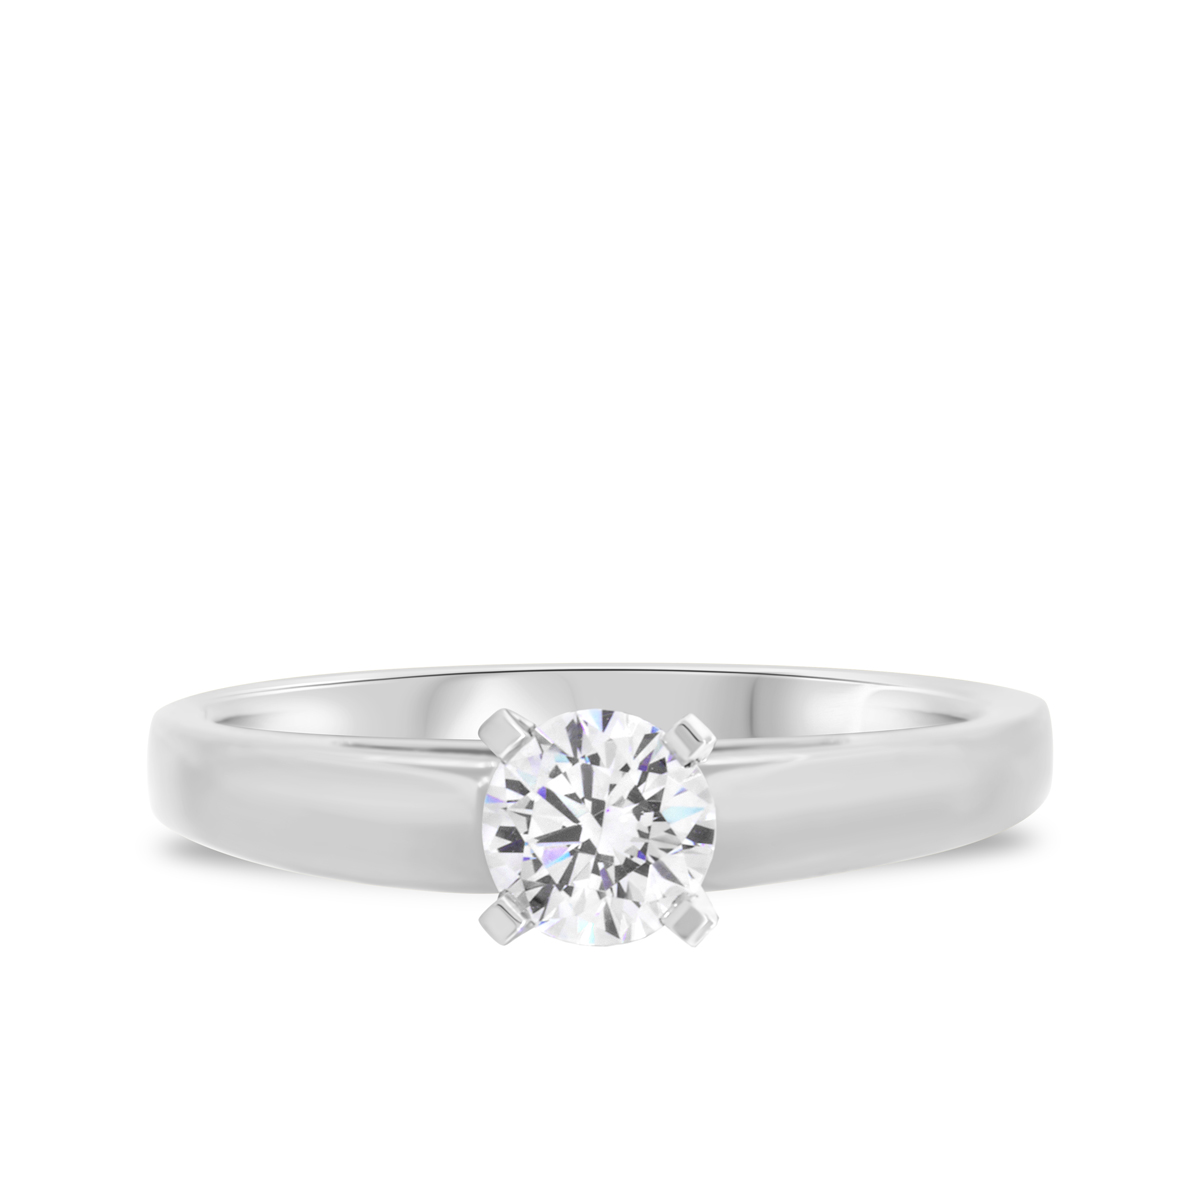 1 ct Diamond Solitaire Engagement Ring 14K White Gold